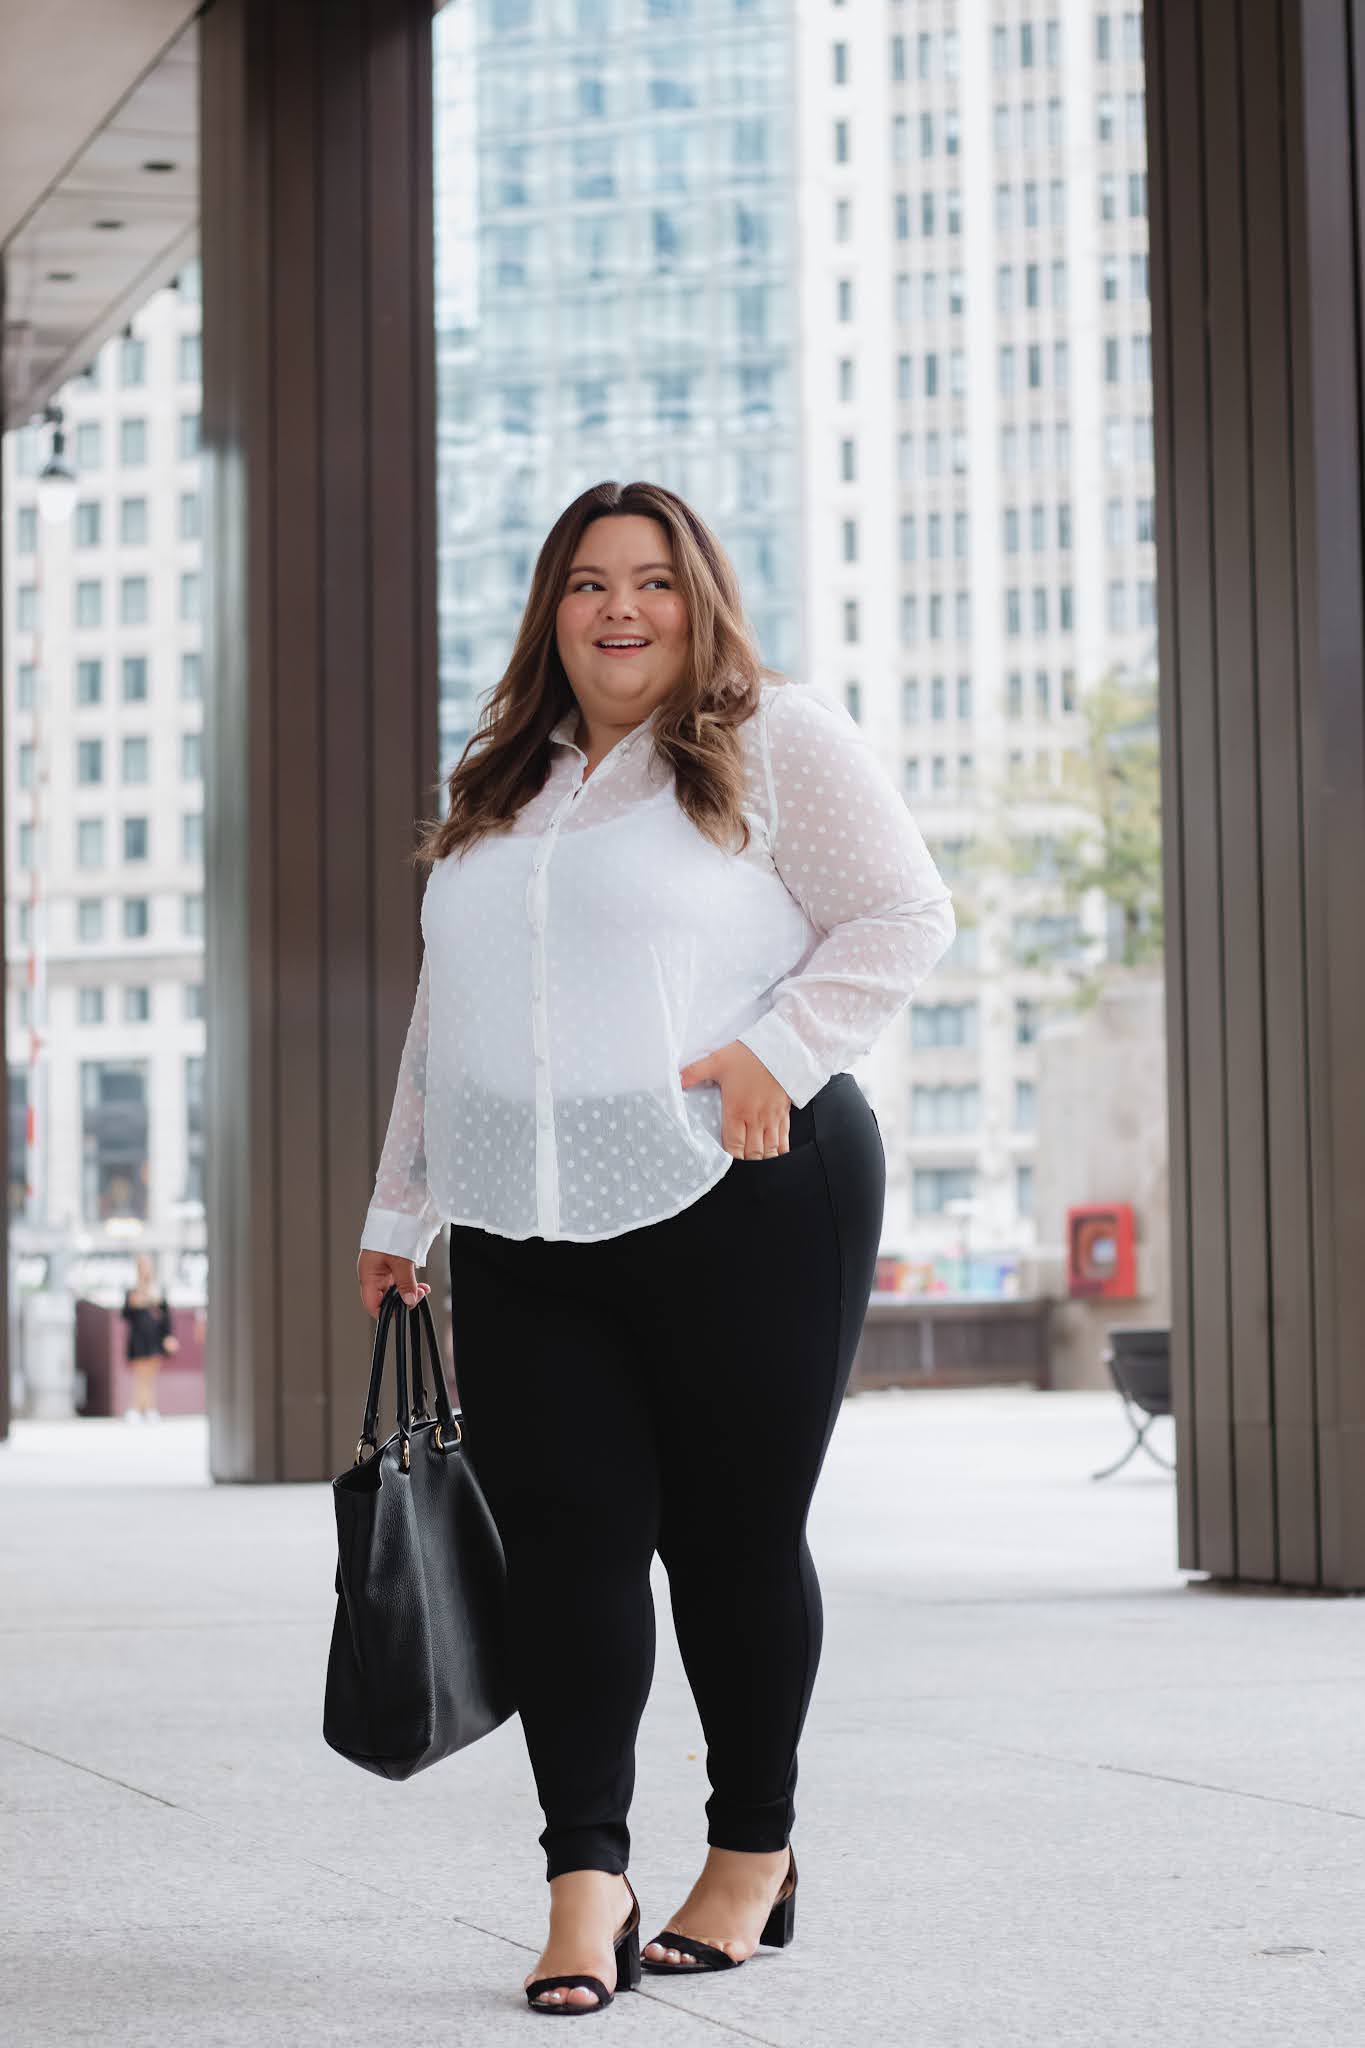 13 Petite Plus Size Clothing Brands Shop - Natalie in the City